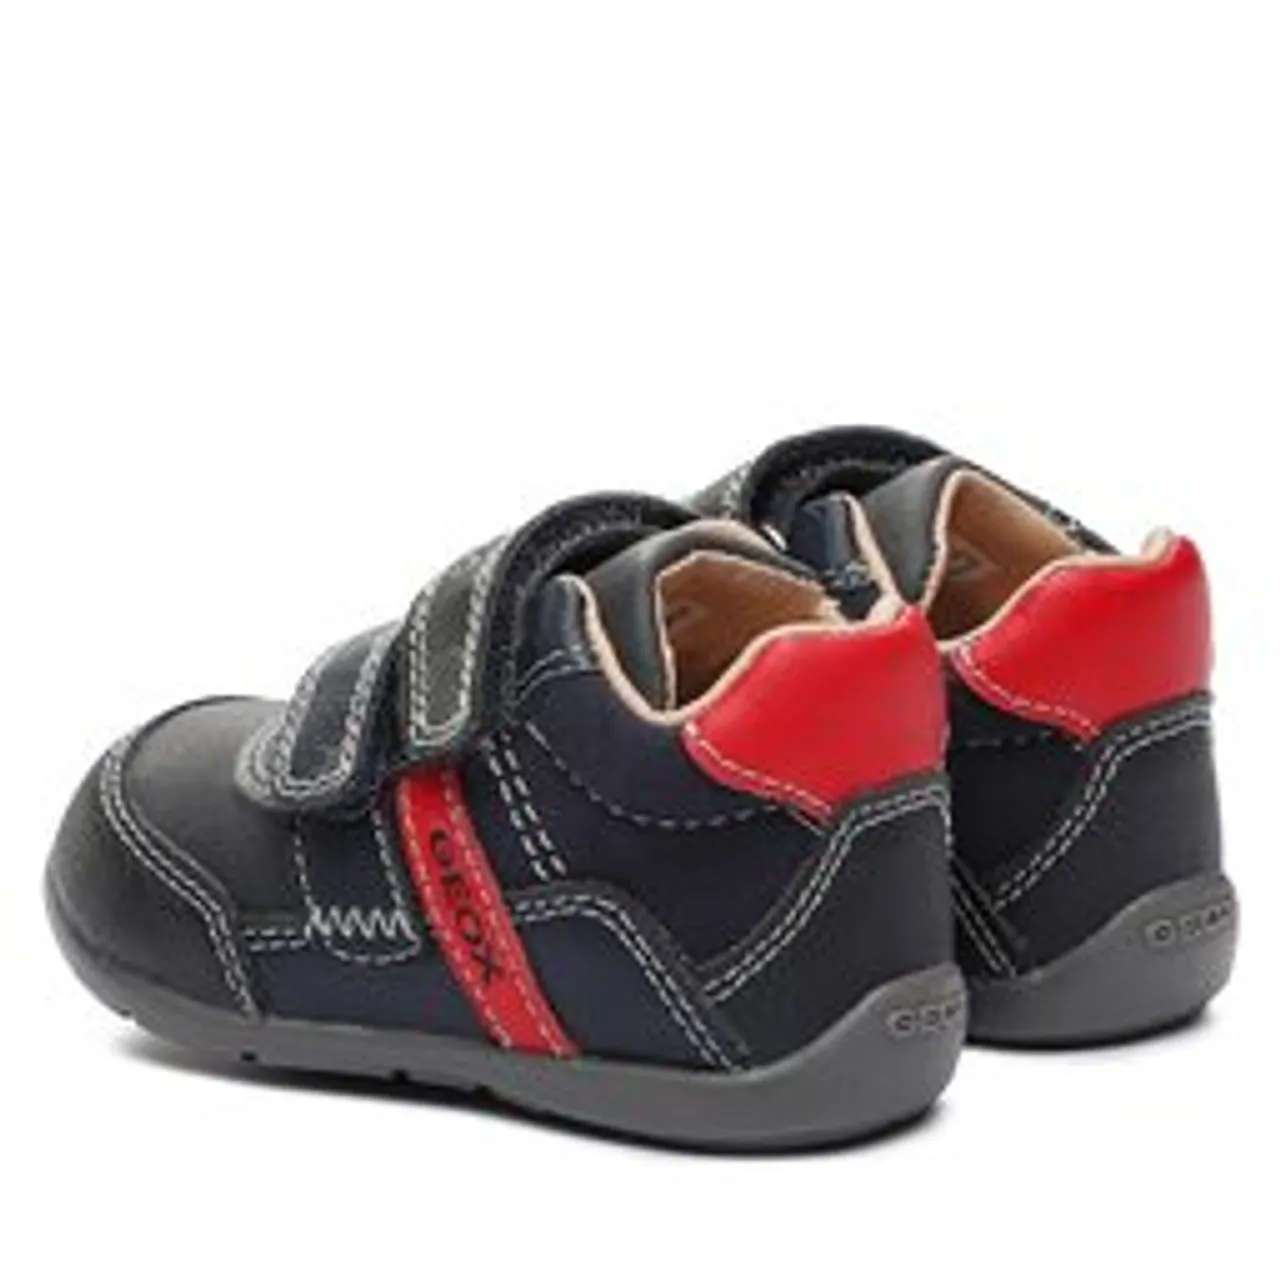 Sneakers Geox B Elthan B. A B041PA 000ME C0735 Navy/Red